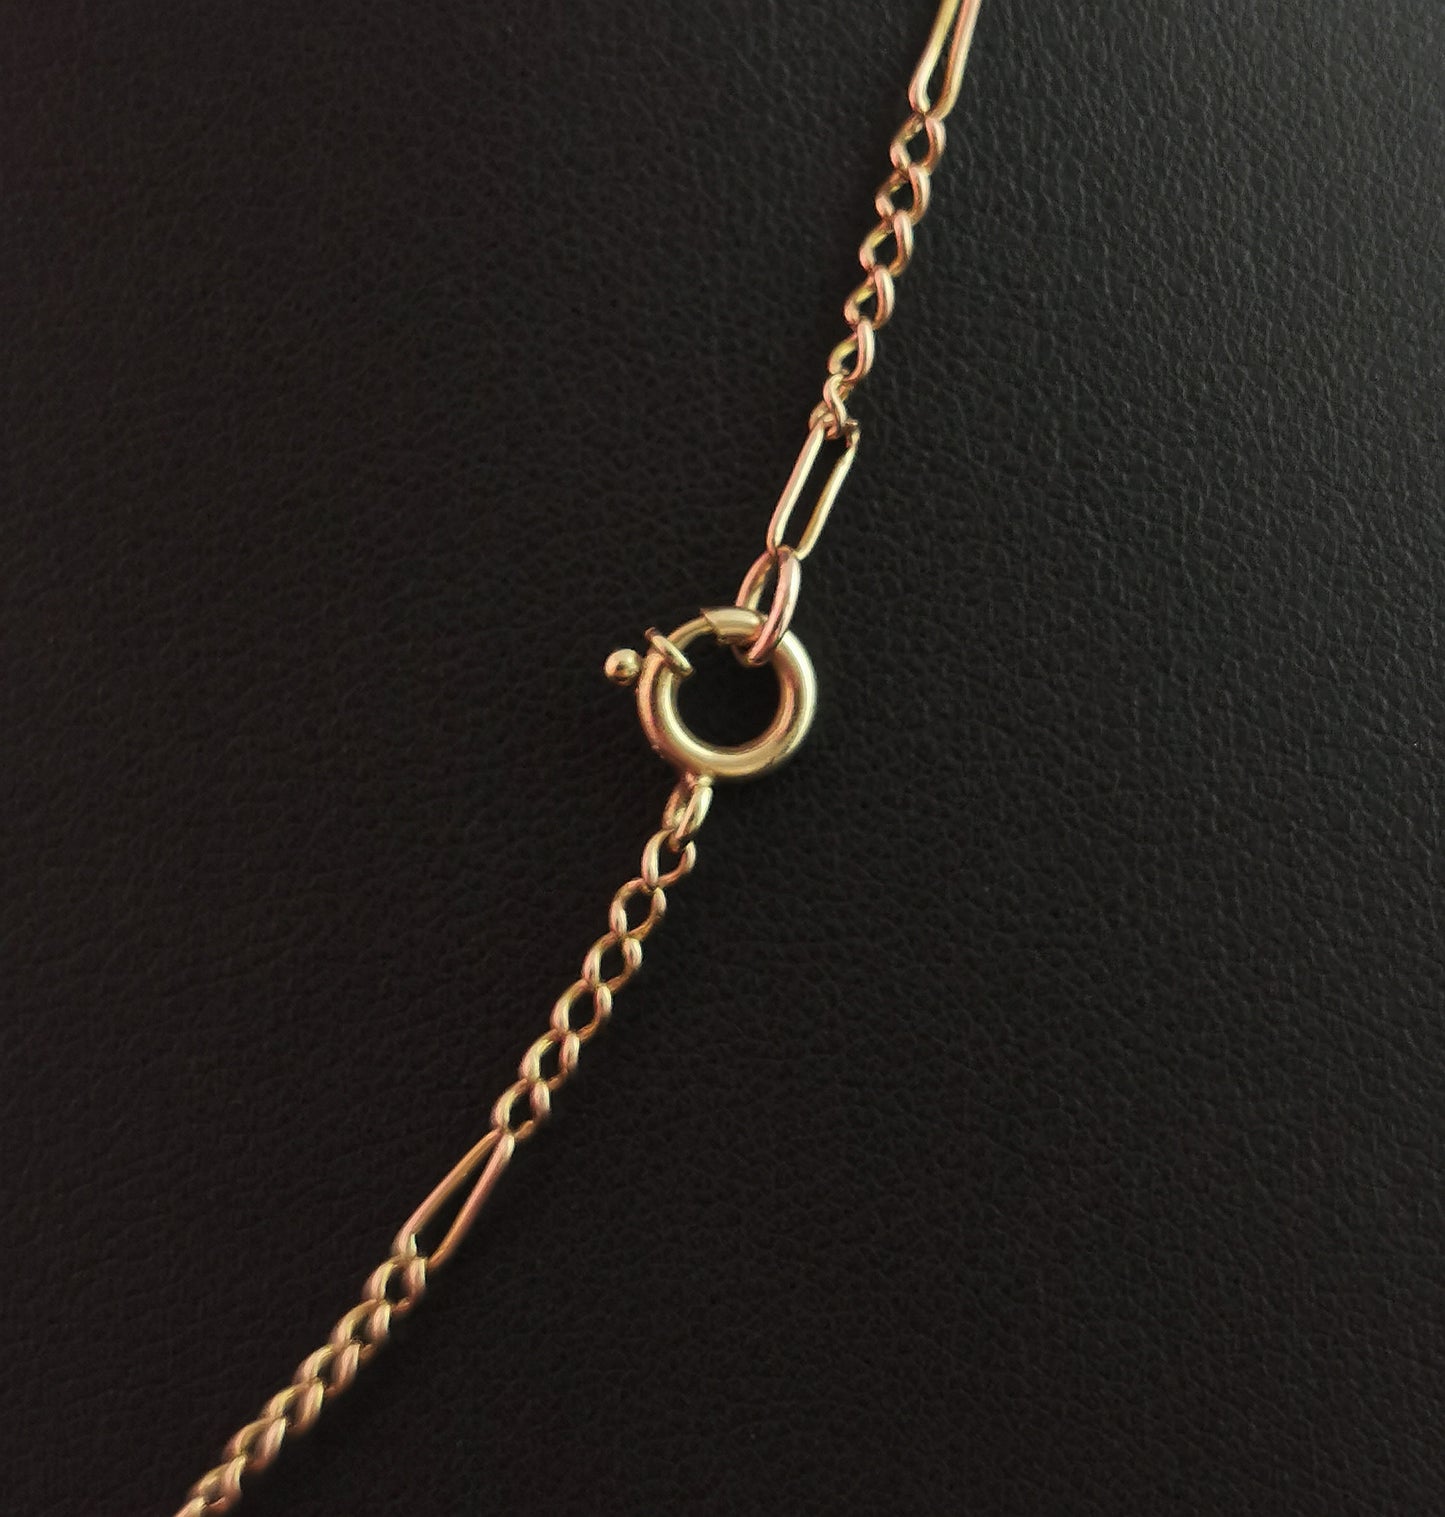 Antique 9ct gold fancy link figaro chain necklace